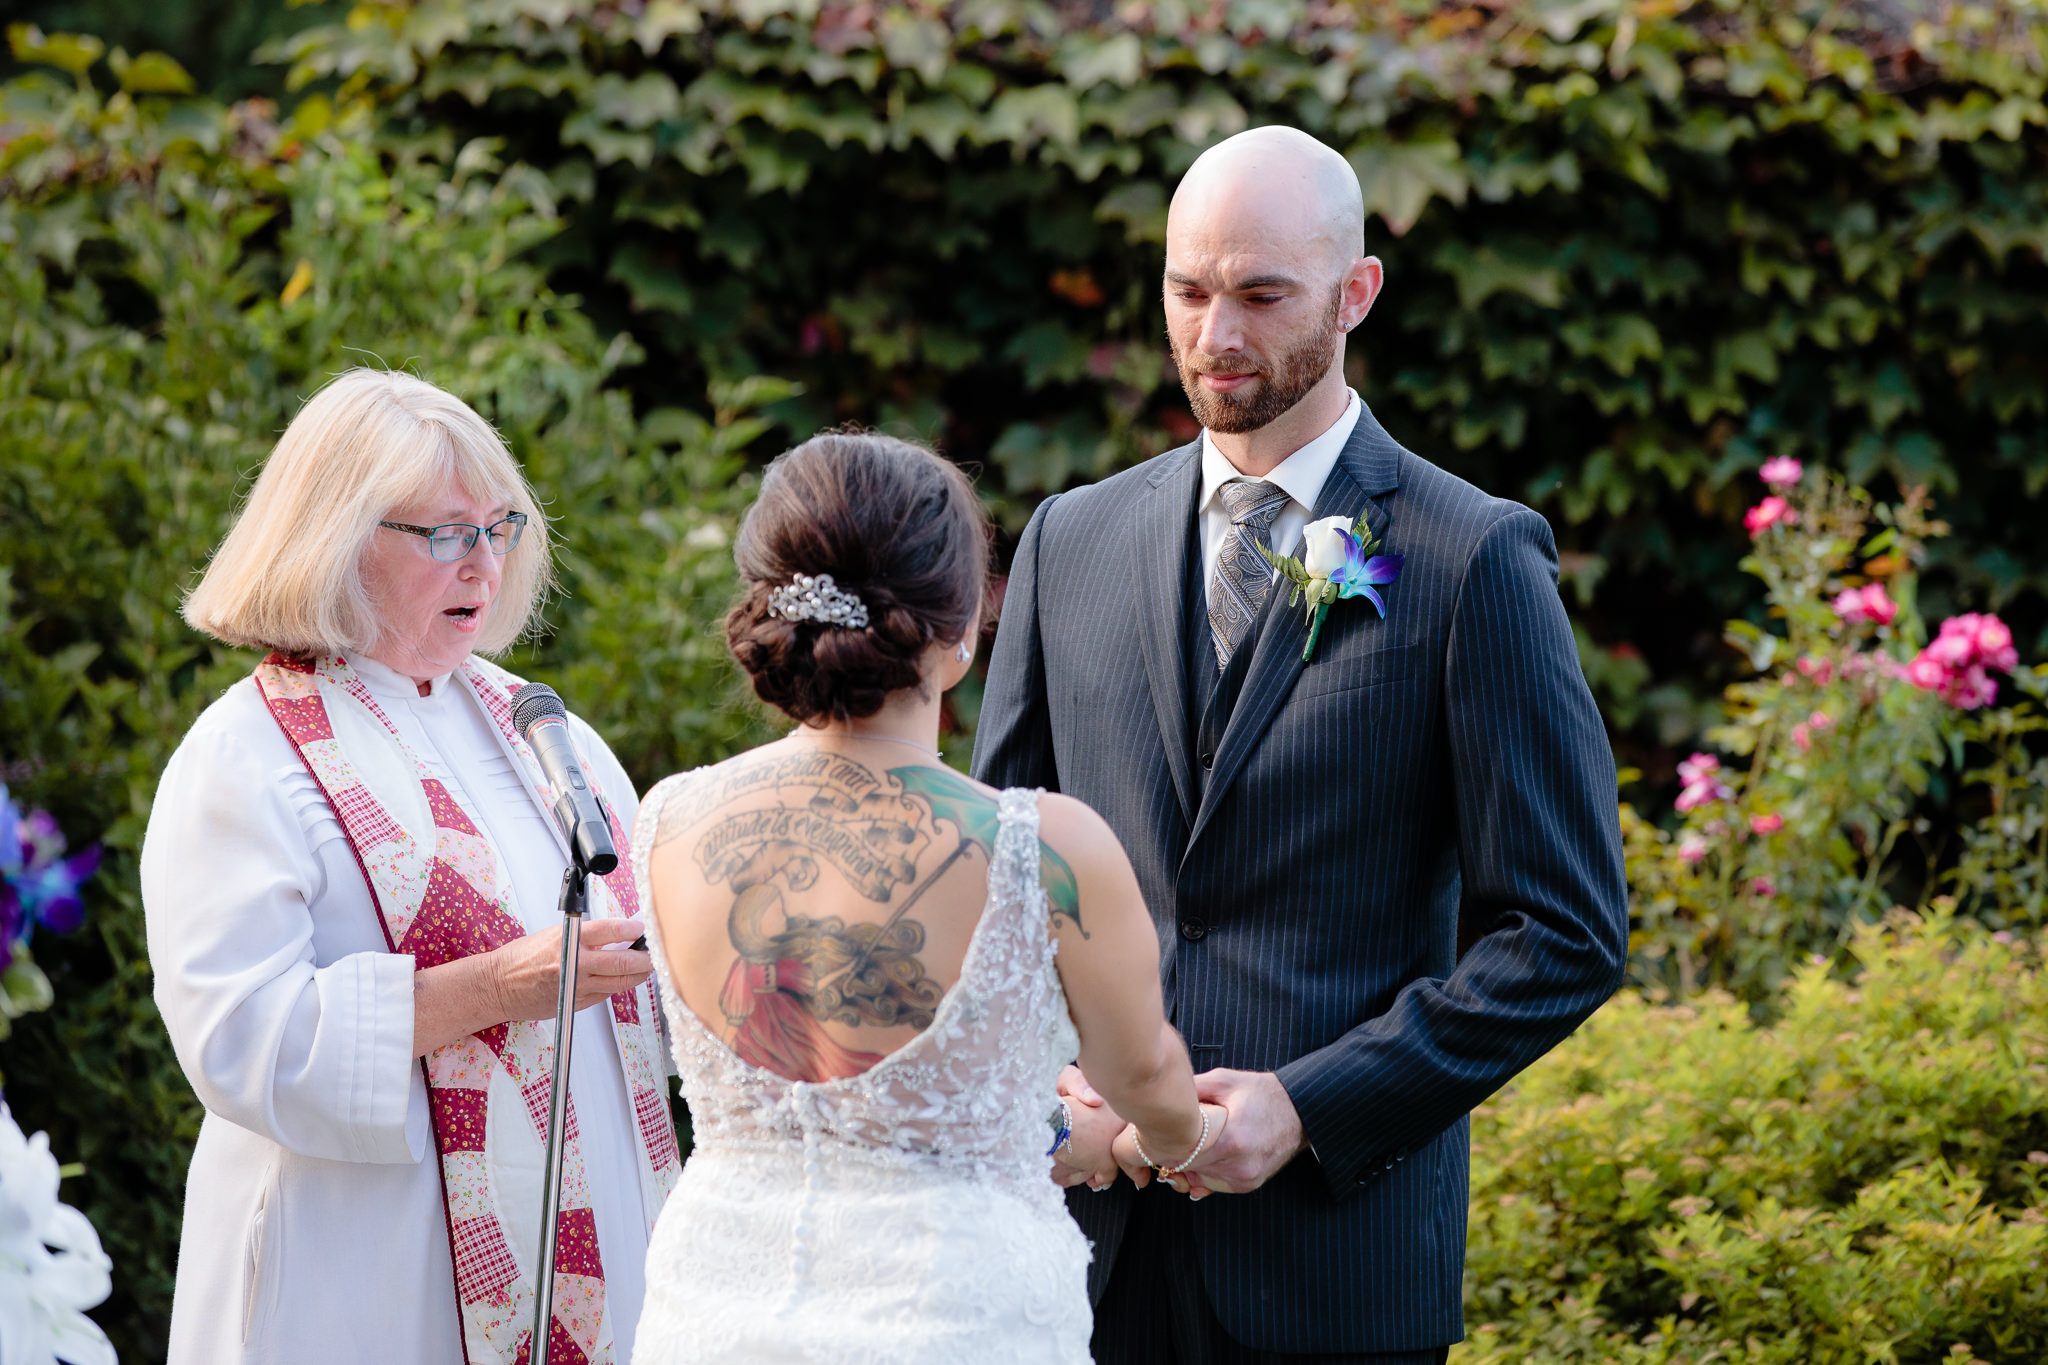 Groom listens to the bride say her vows at a National Aviary wedding ceremony